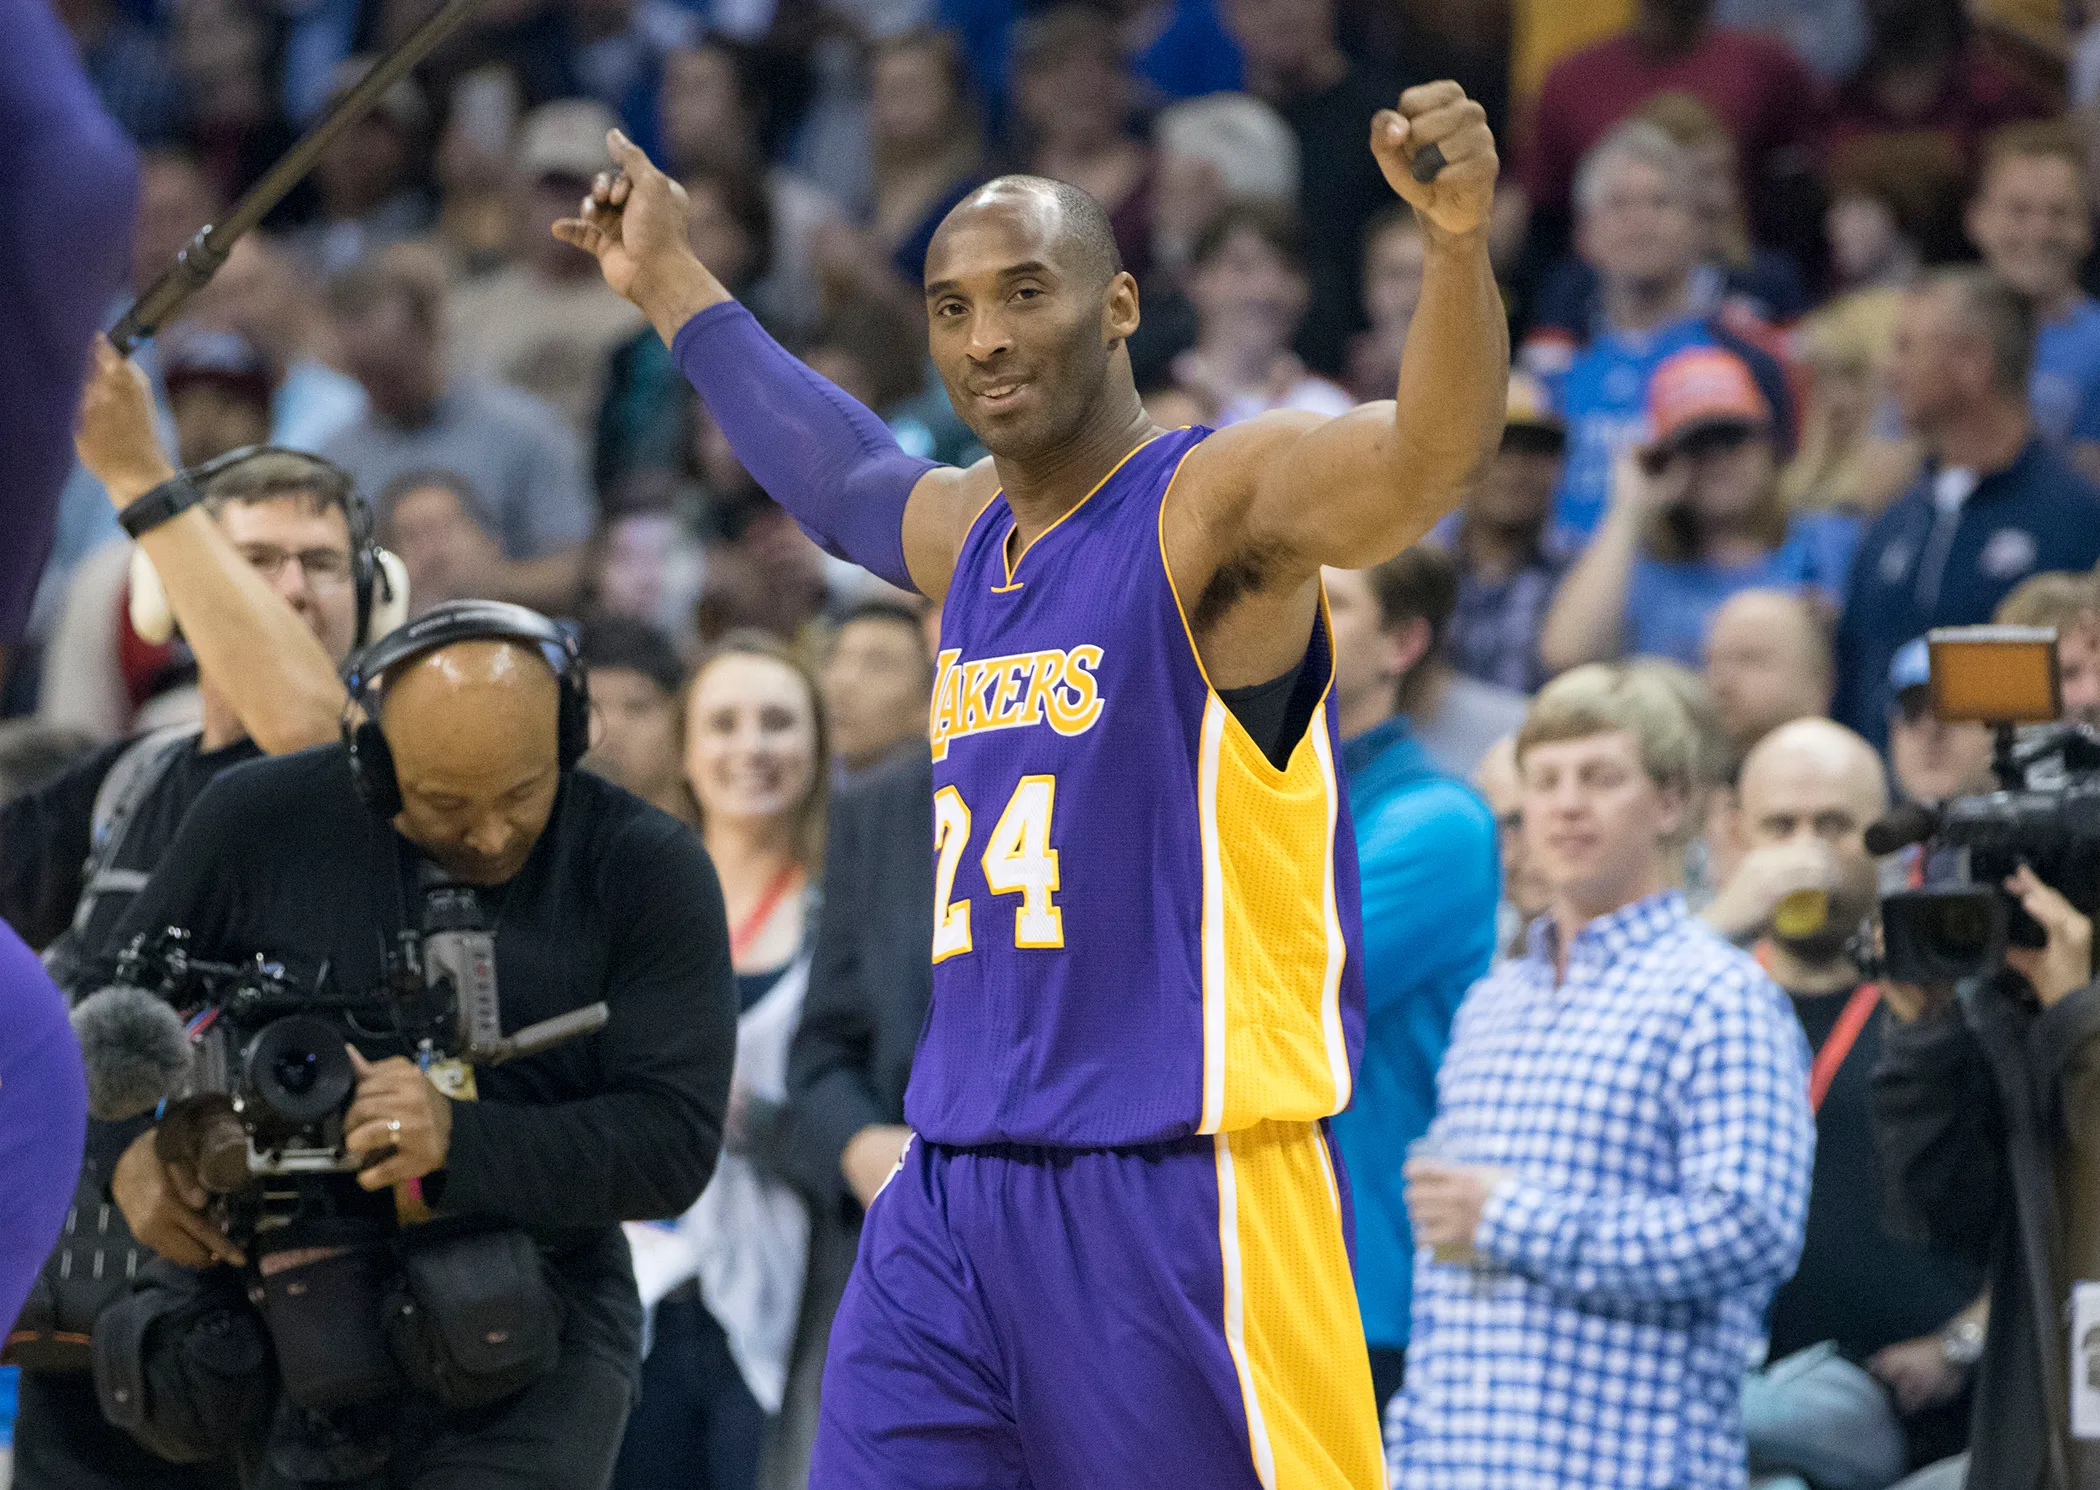 Lakers ticket prices soar for Kobe Bryant's final game